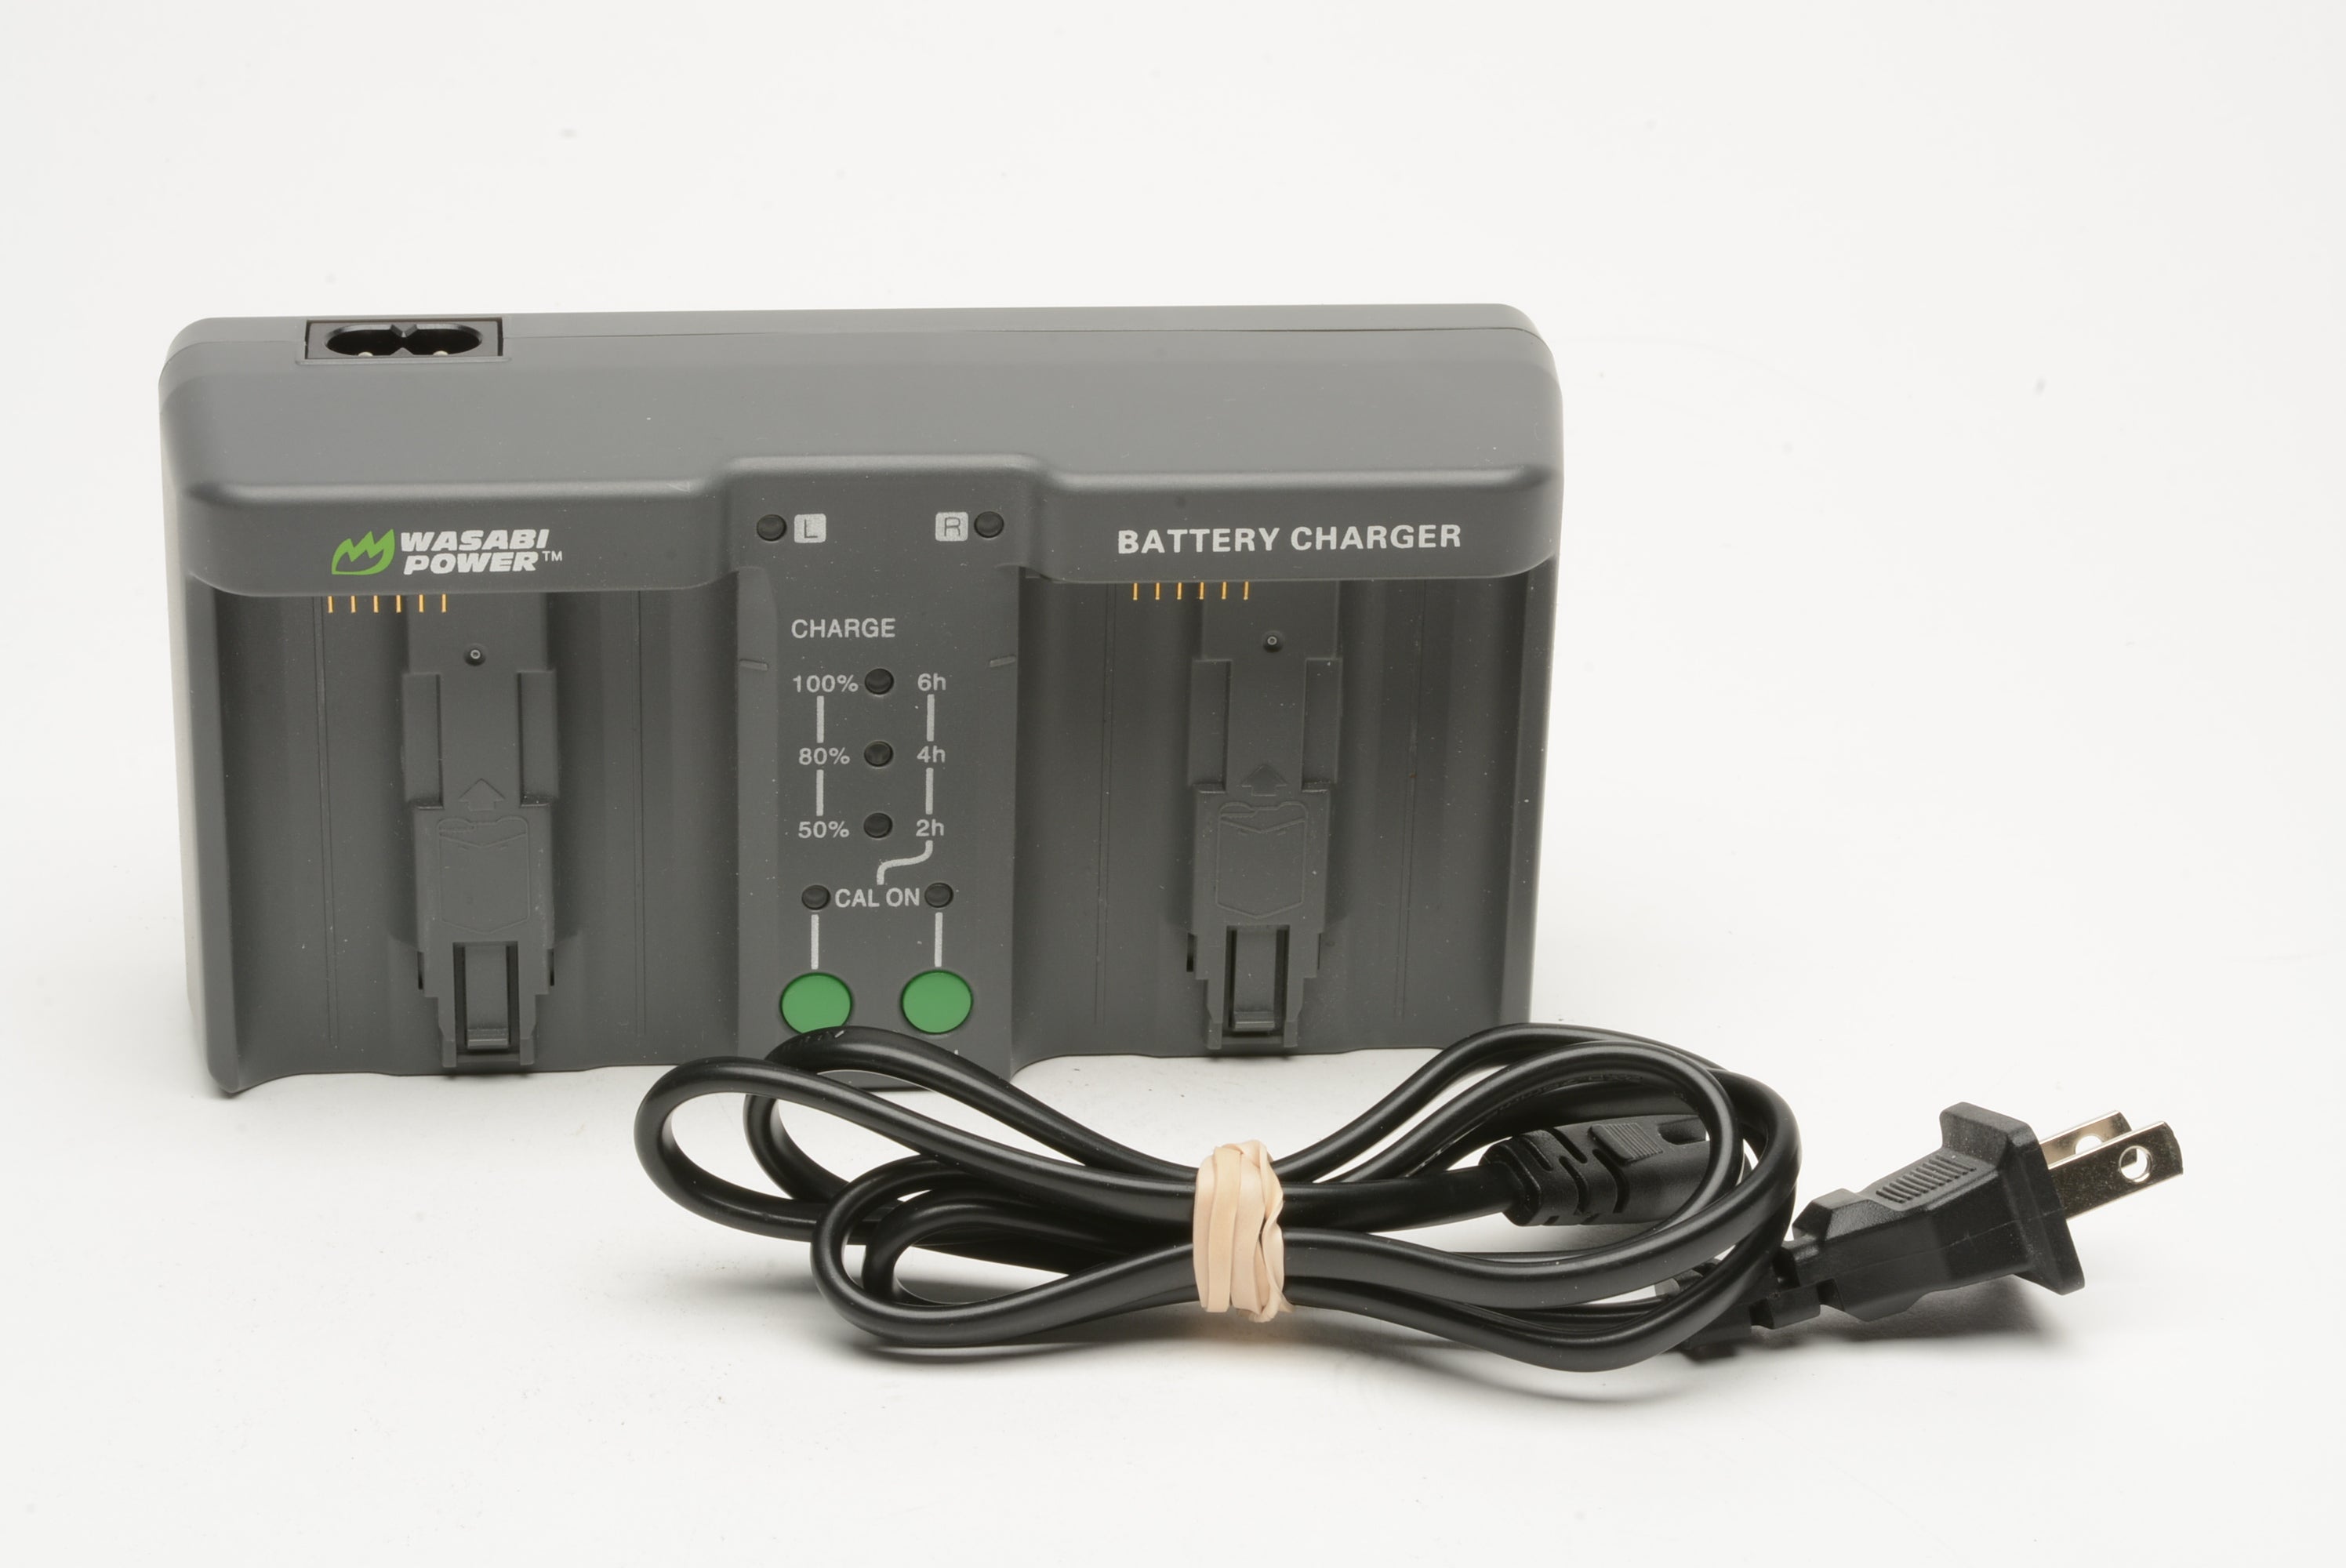 Wasabi Power Dual Battery Charger LCH-DC-ENEL18 Nikon MH-26, MH